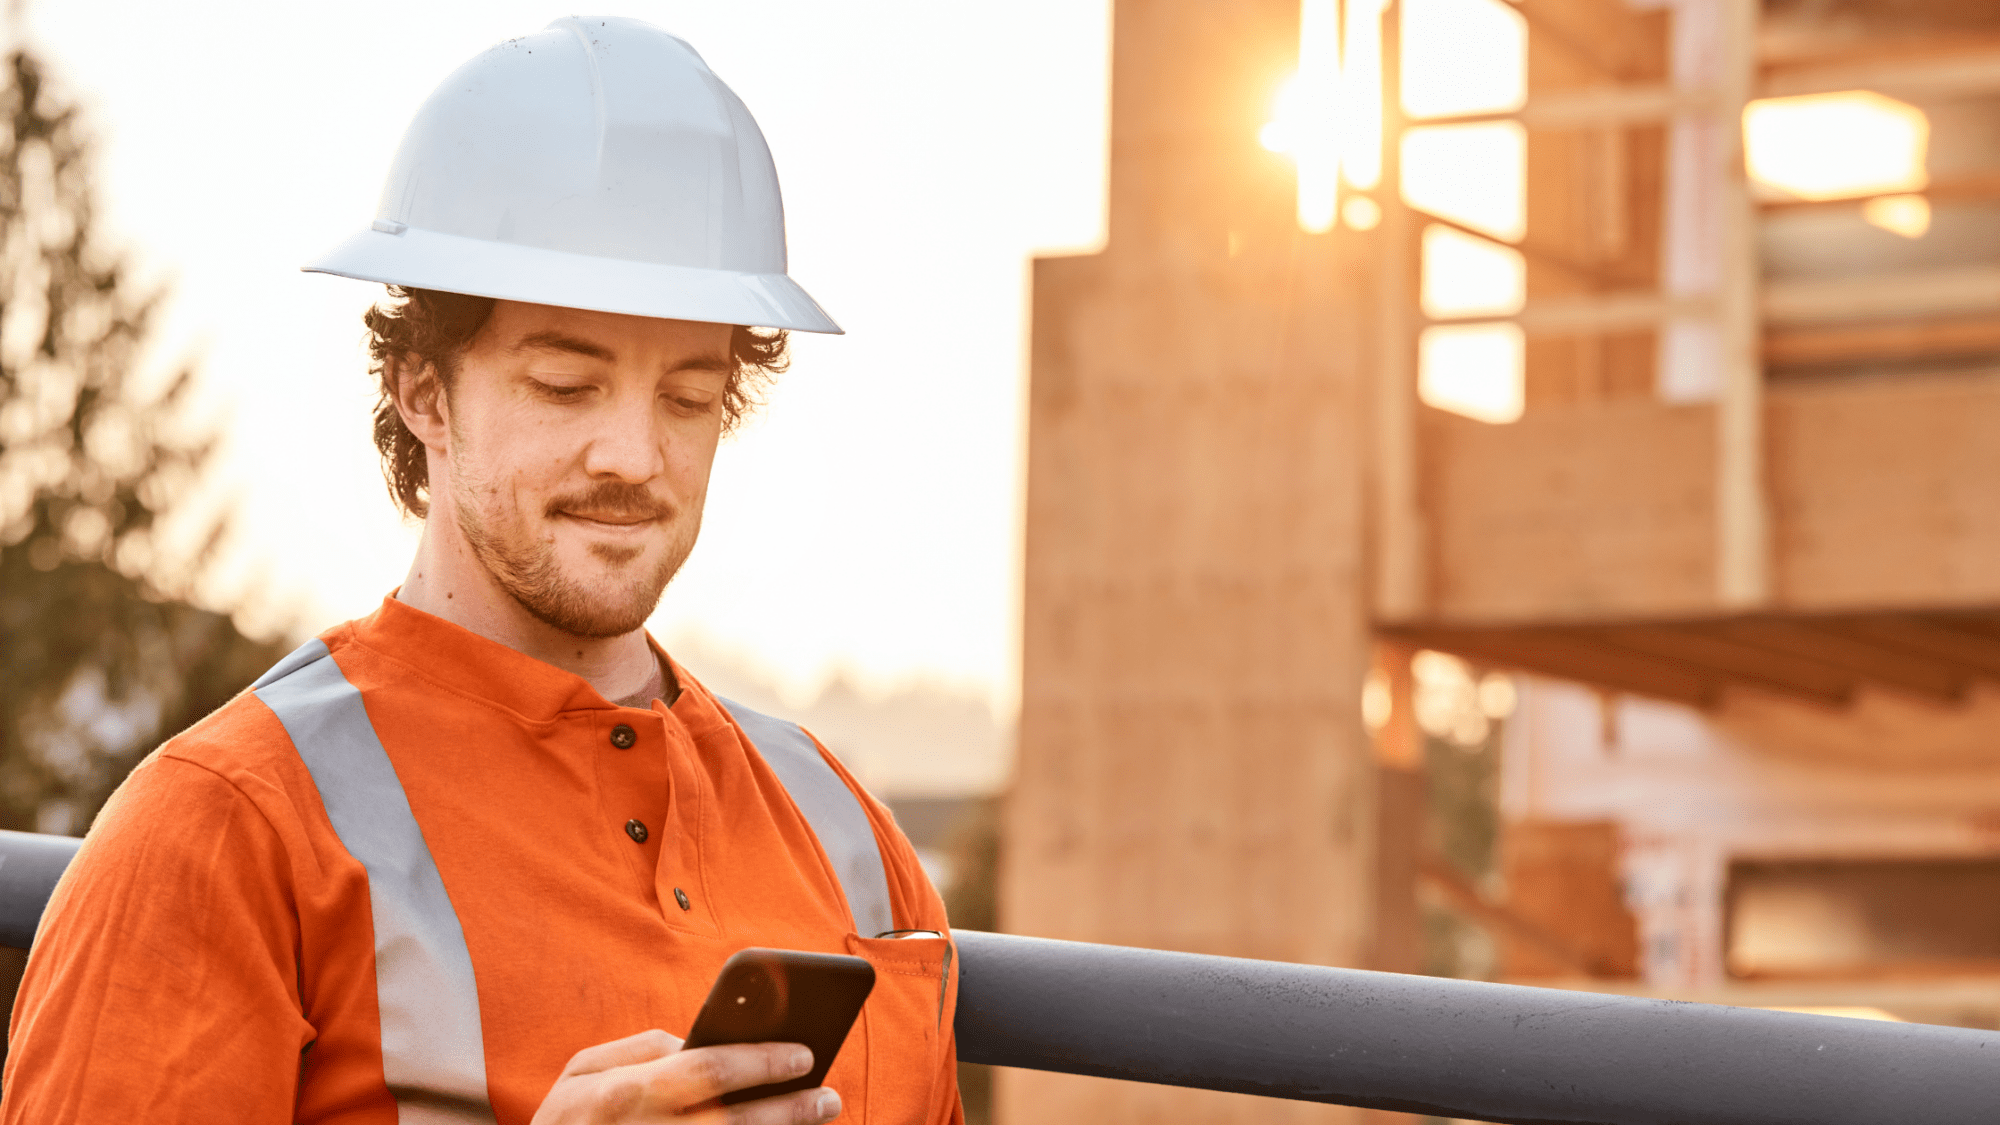 How technology can improve lone worker safety